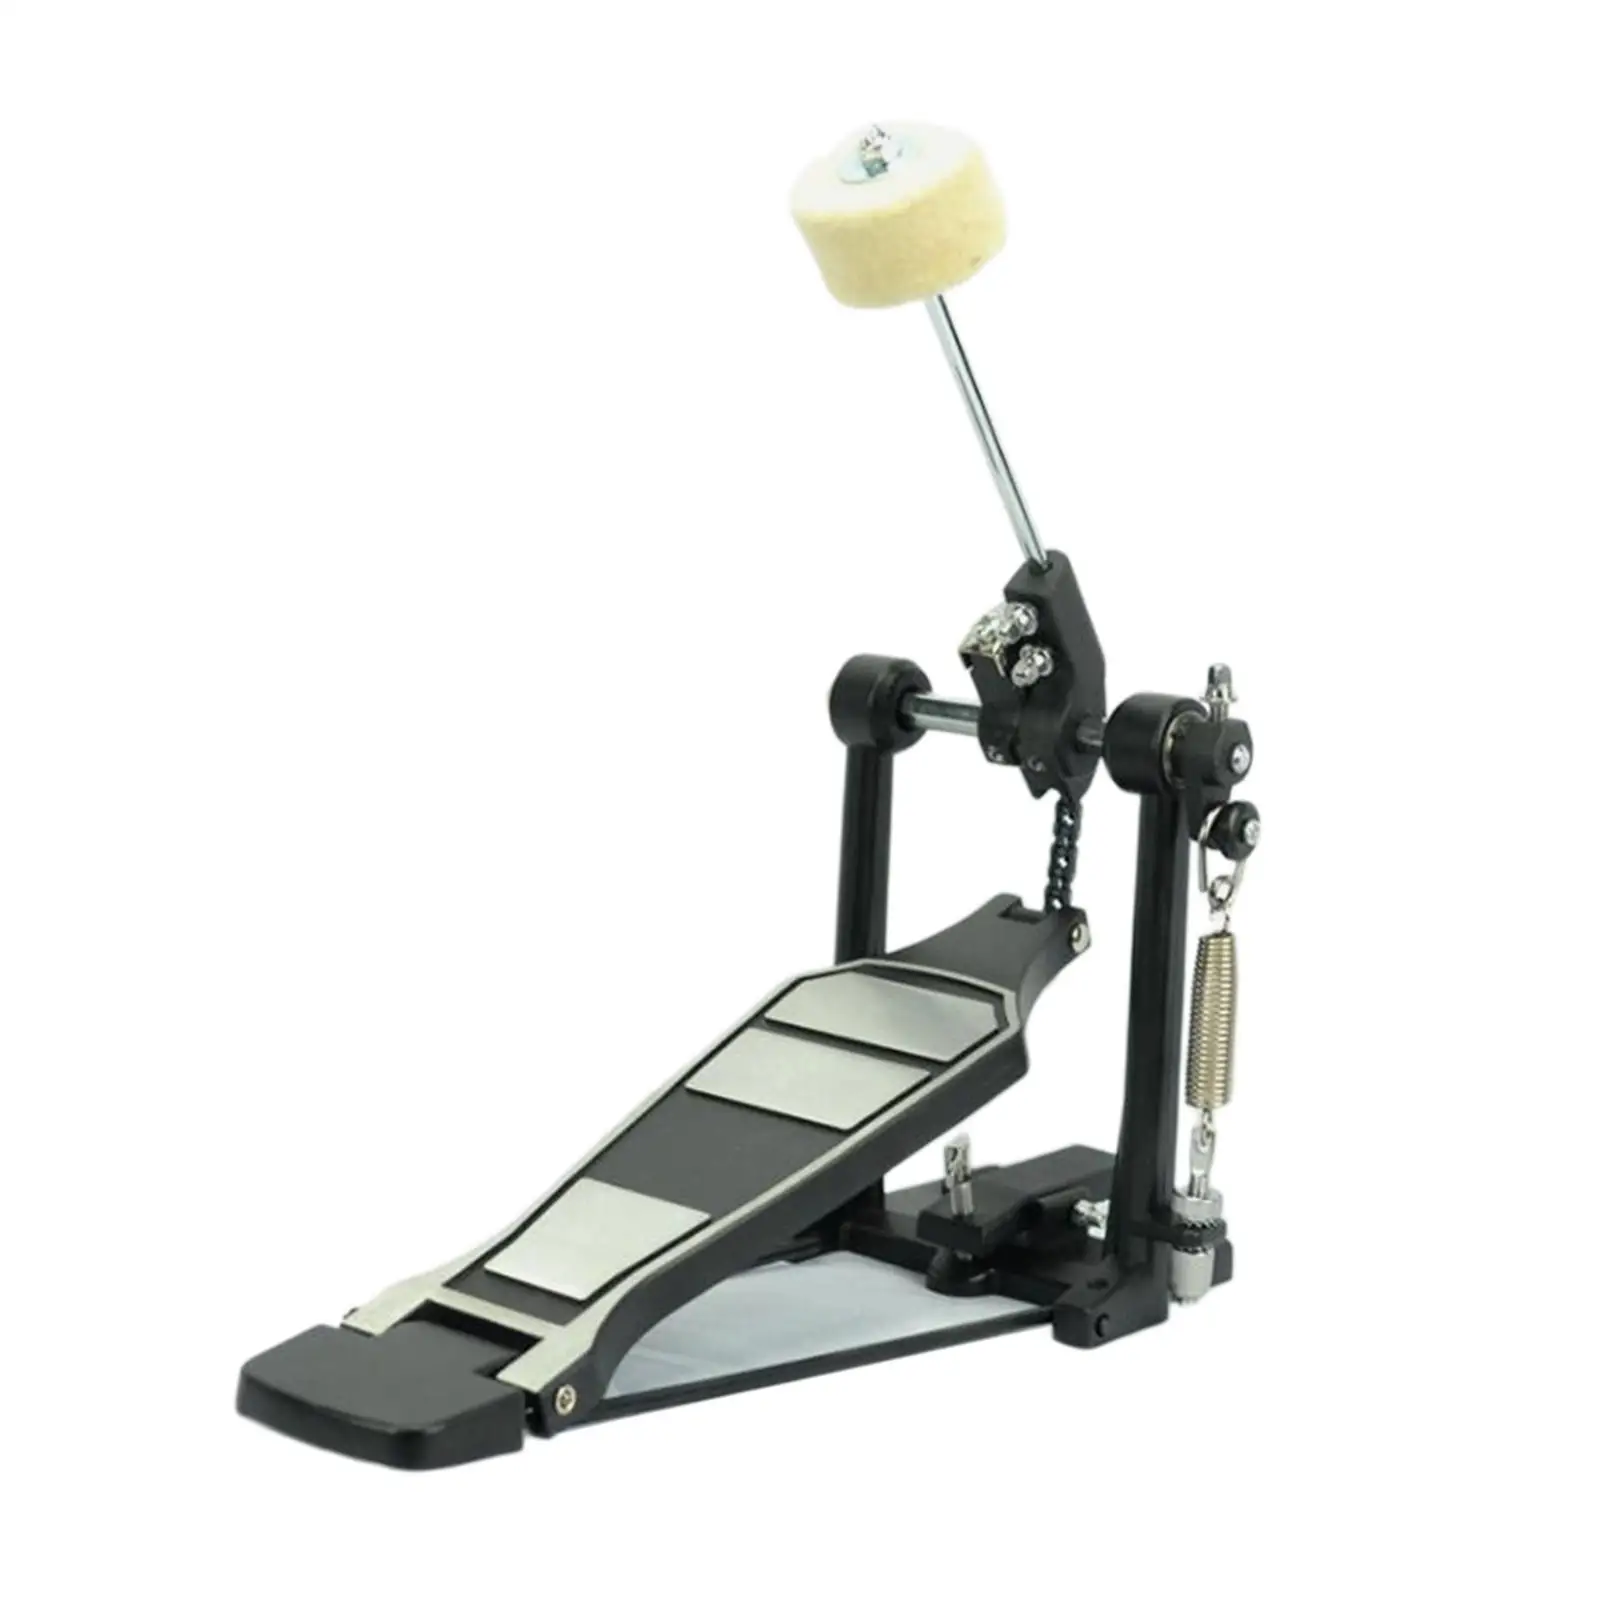 Bass Drum Pedal Strong Stable for Beginner, Pro Drummers Durable for Jazz Drums Felt Head Drum Foot Pedal Beater Drum Kick Pedal